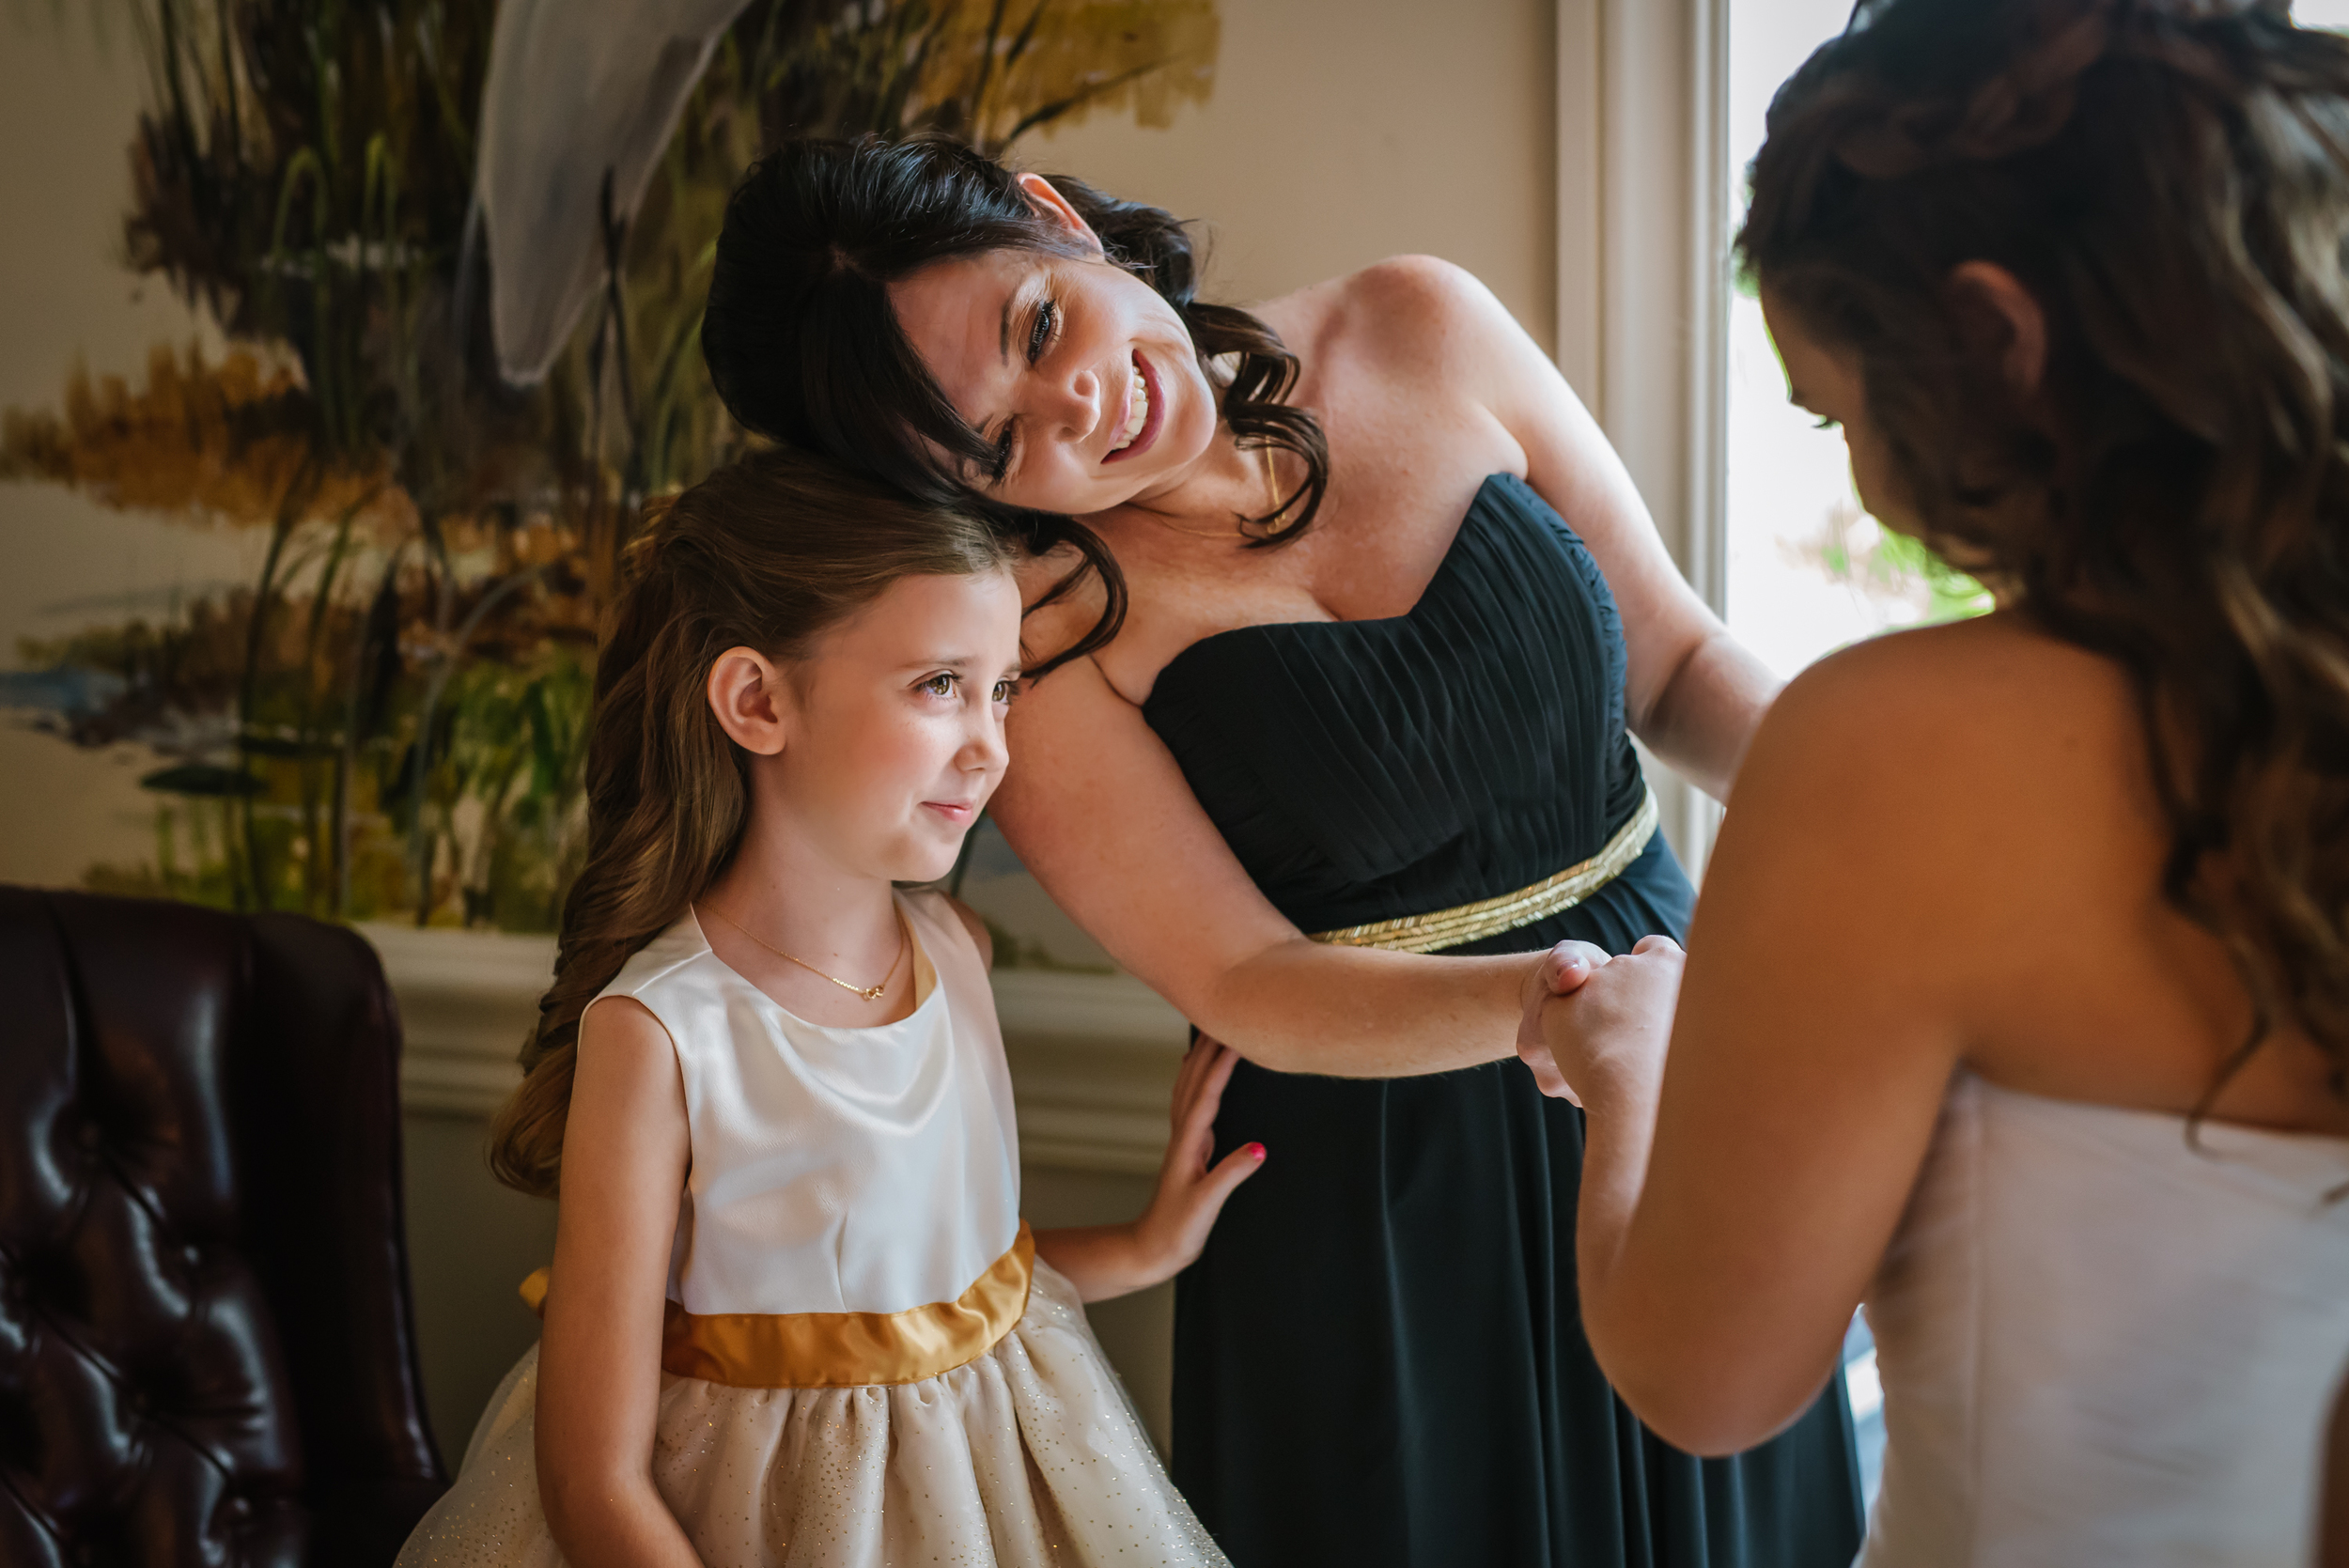 Katlin and Jarret were married at the Carleoul yacht club this fall. Her little niece/flower girl is too precious for words in this getting ready image.&nbsp;